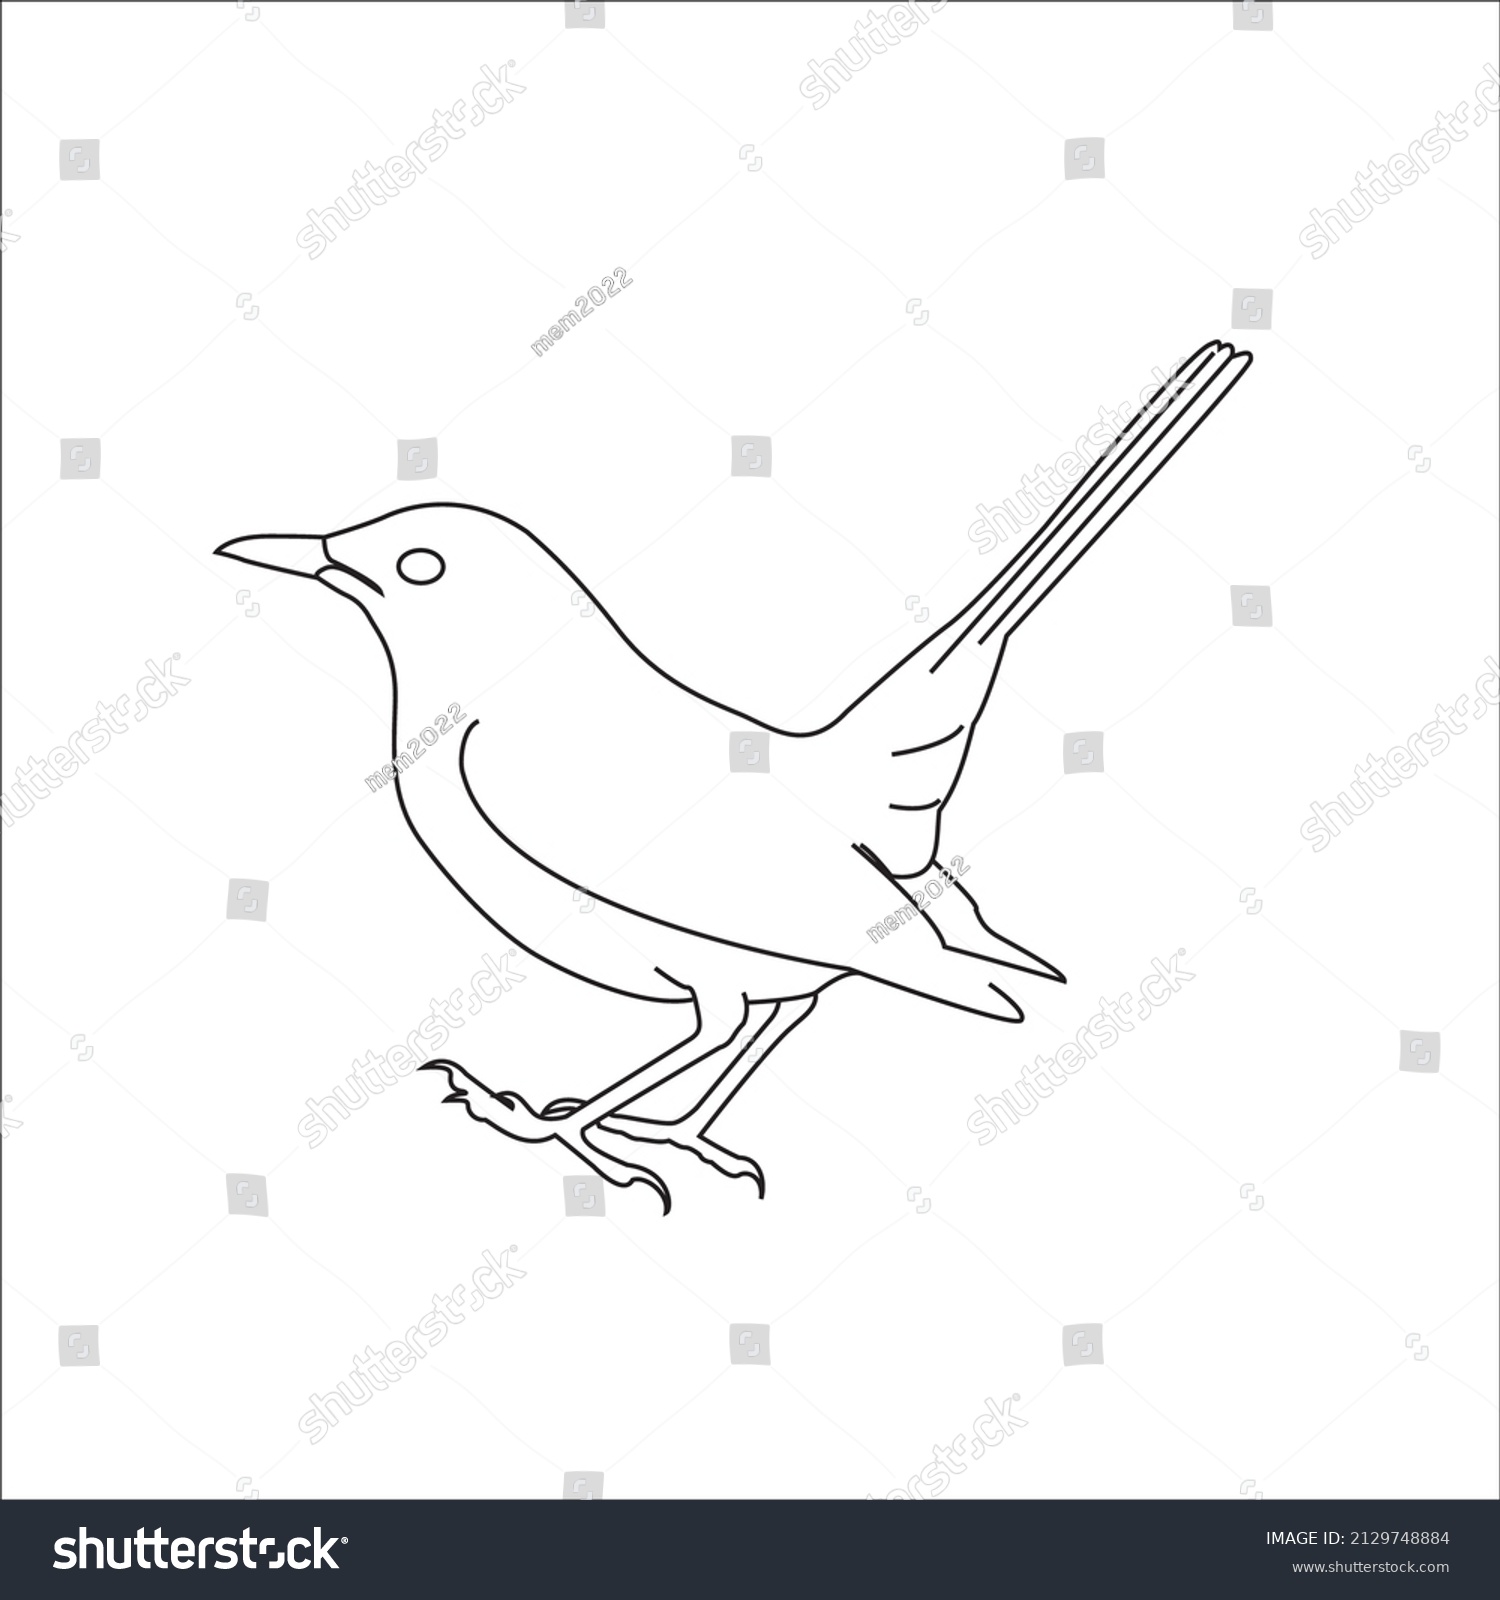 Magpie Coloring Page Vector Line Art Stock Vector (Royalty Free